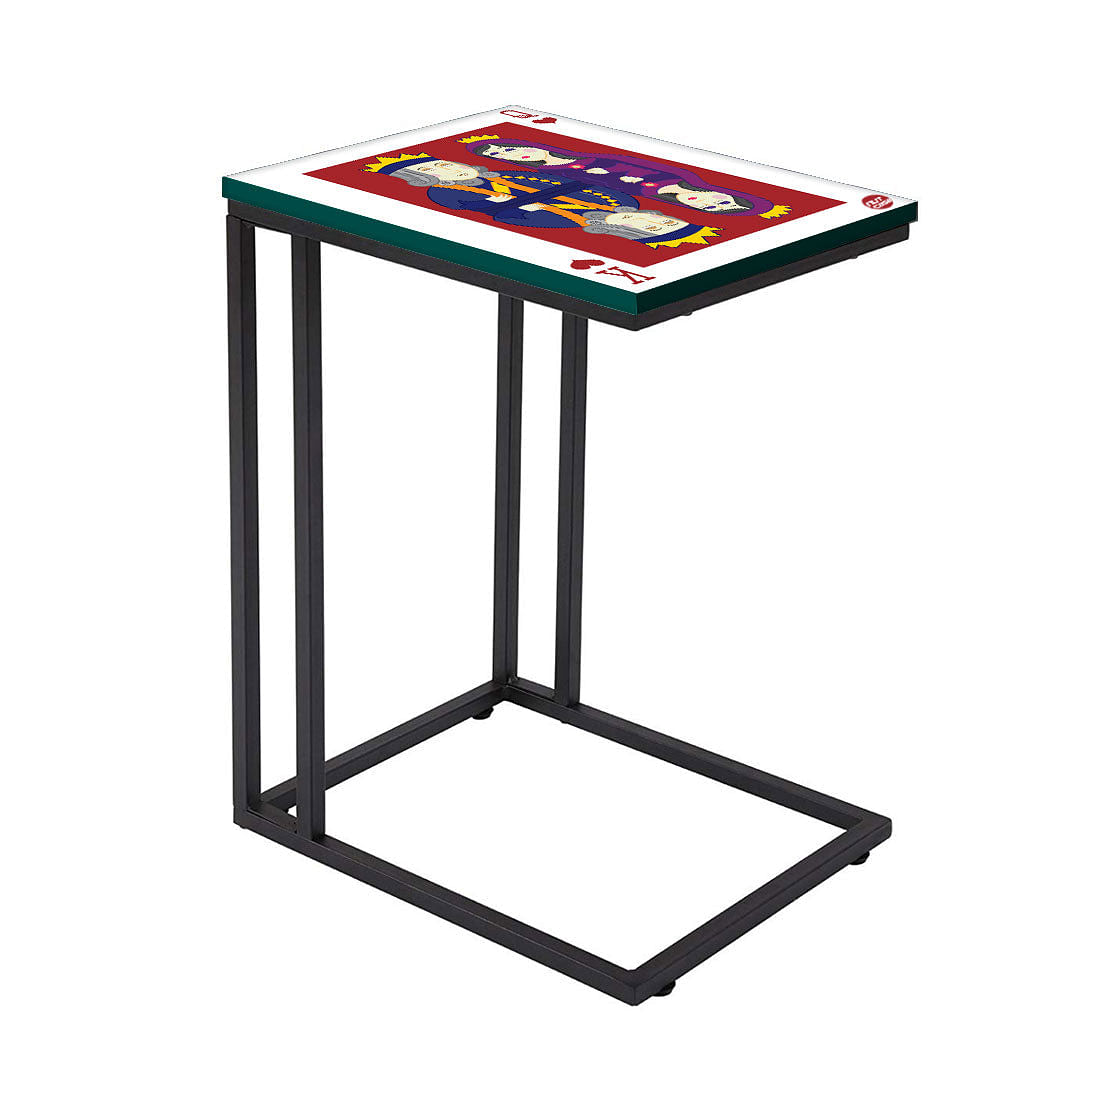 New Black C Side Table  - King Queen Nutcase